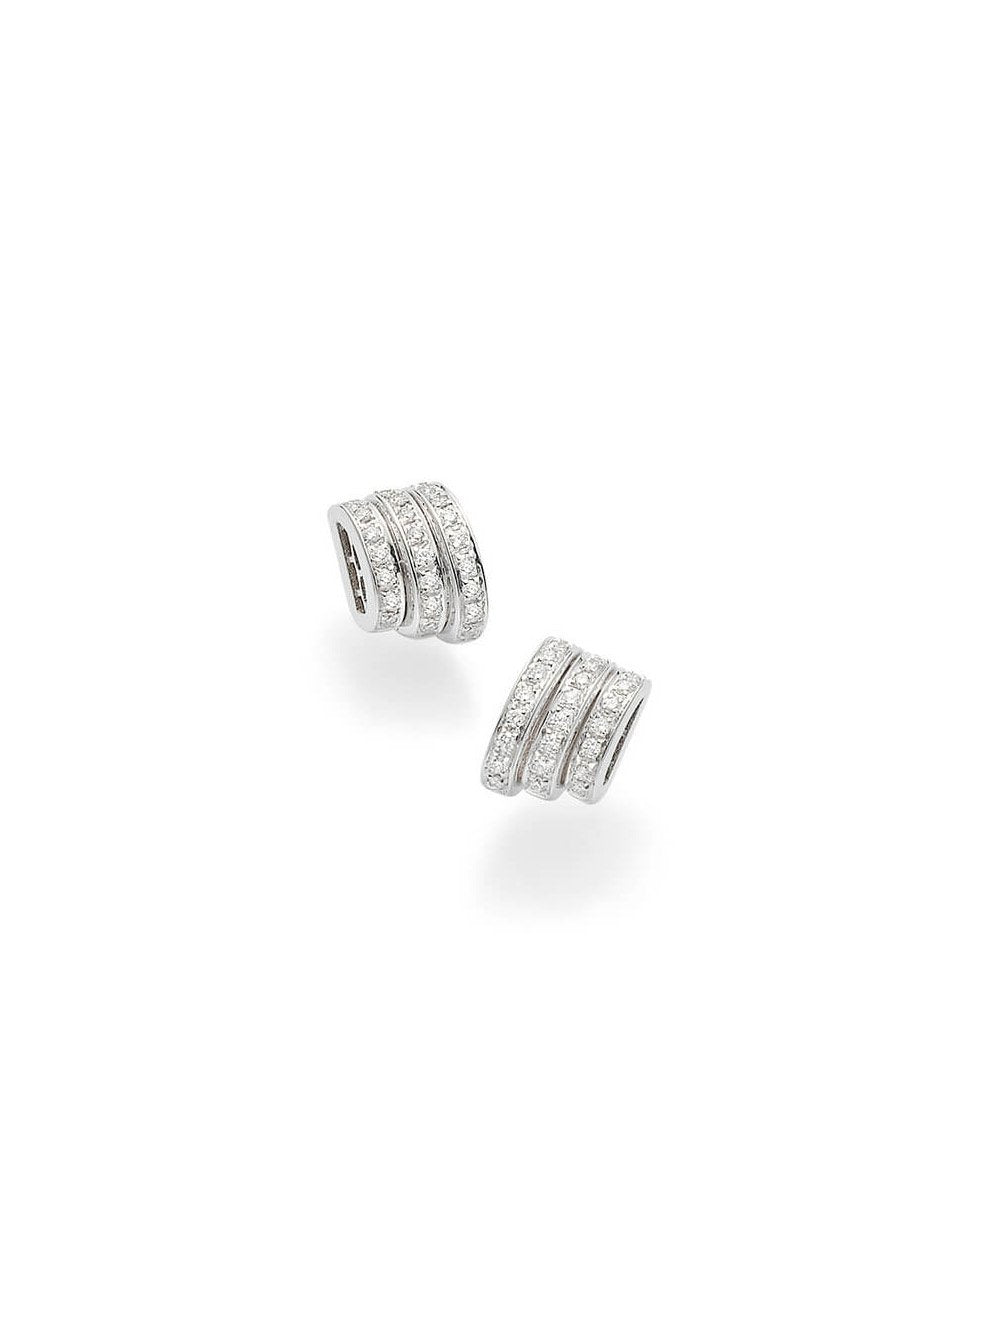 Fope Prima Earrings in 18ct White Gold with Diamonds